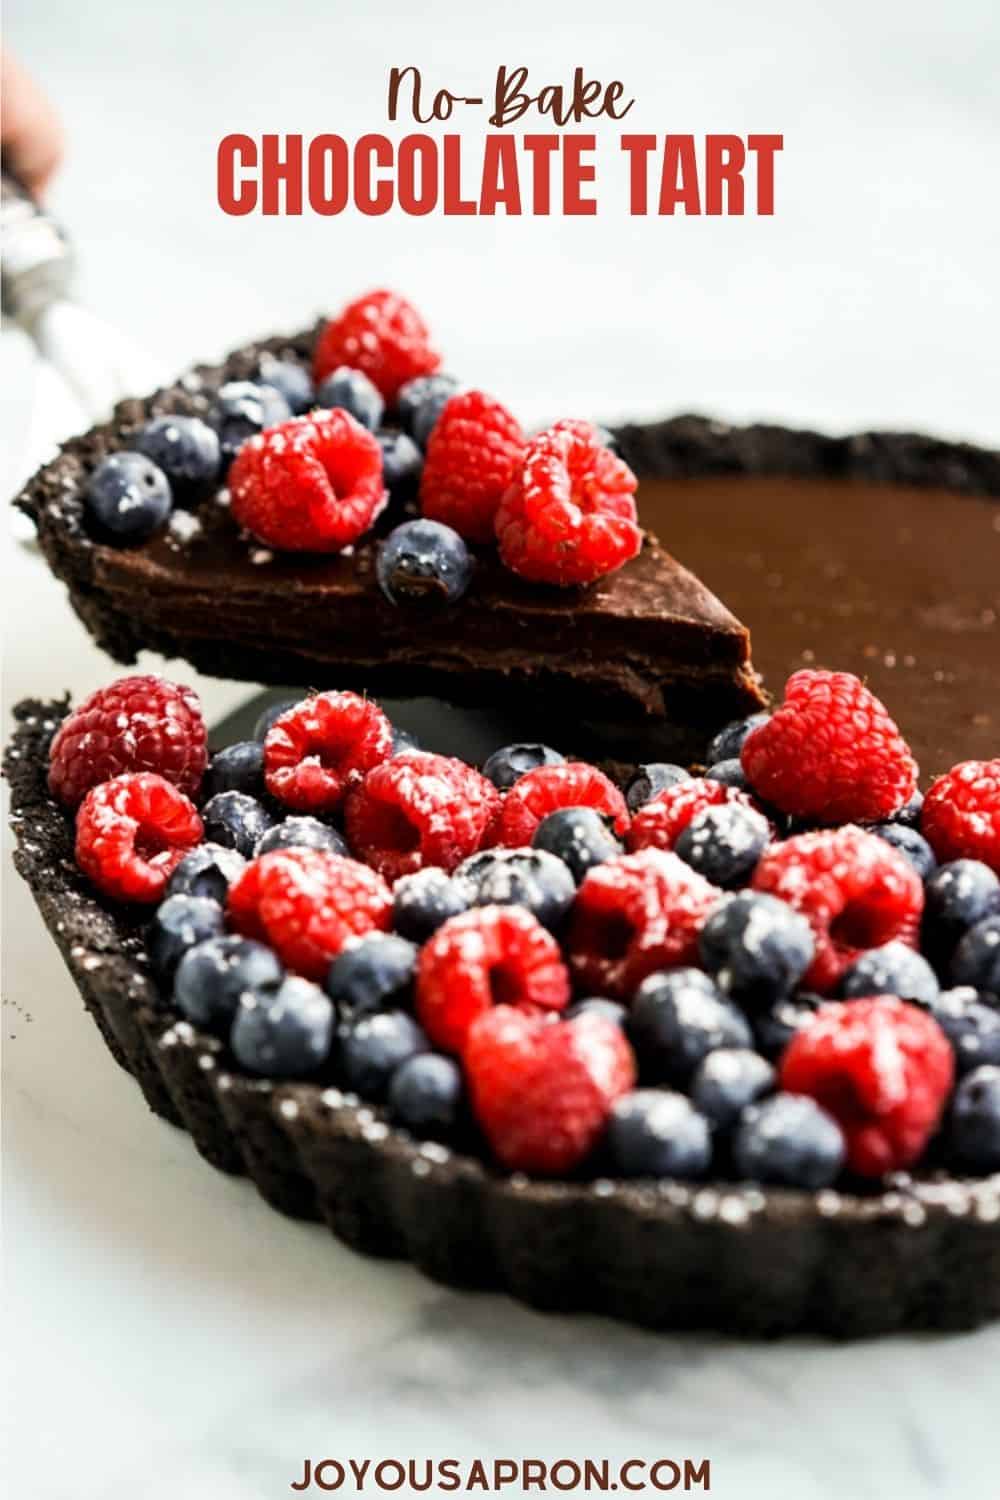 No-Bake Chocolate Tart - Oreo crust topped with rich, velvety dark chocolate ganache filling, served with berries. A delightful and easy no-bake dessert! via @joyousapron